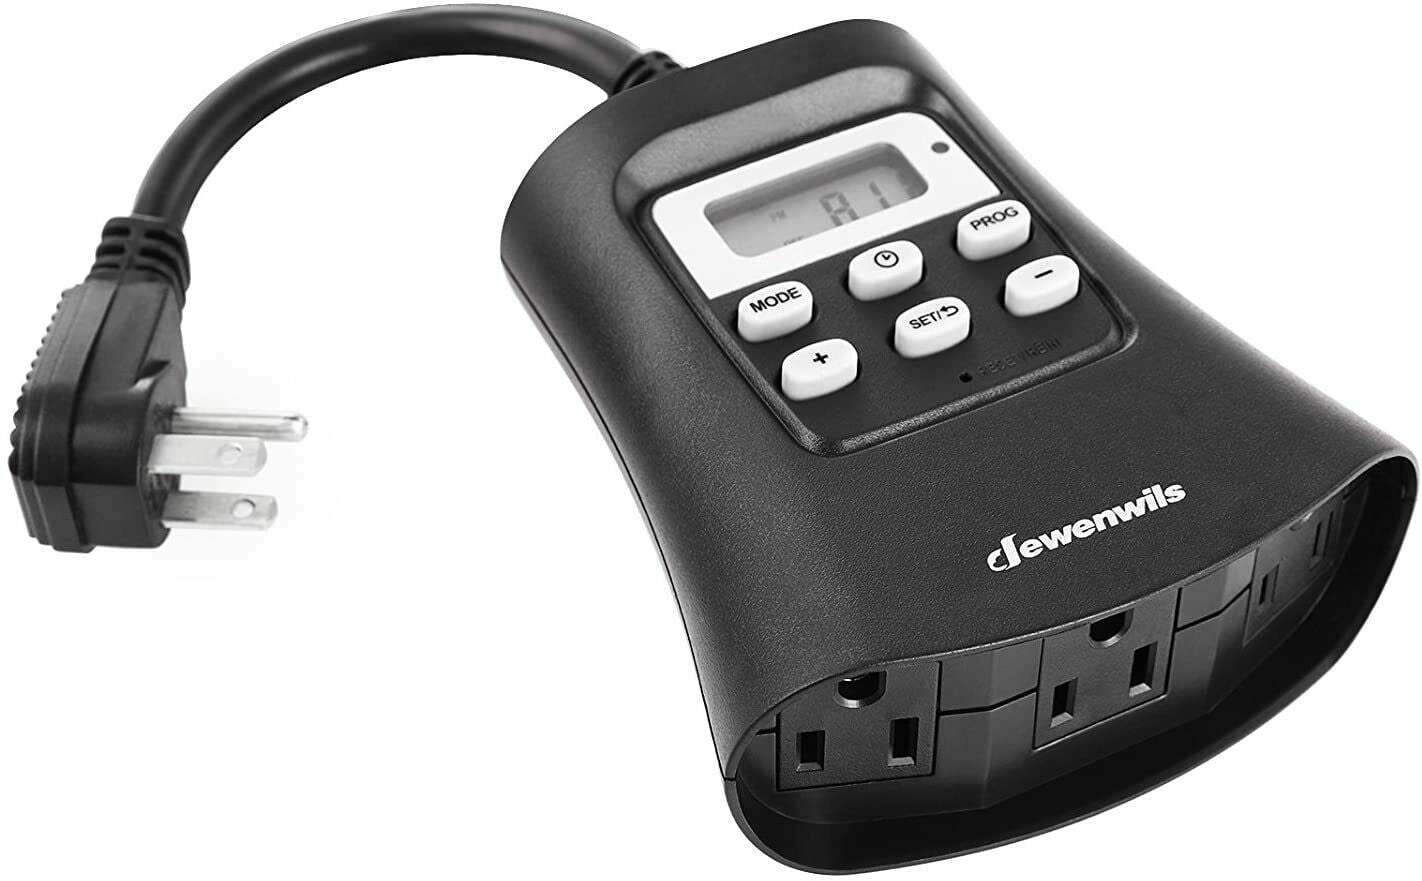 DEWENWILS 24 Hour Outlet Timer, 125V 15A 1000W Timers for Electrical  Outlets, 1 Polarized Outlet, Digital Light Timer for Christmas Decor, Lamp,  Fan